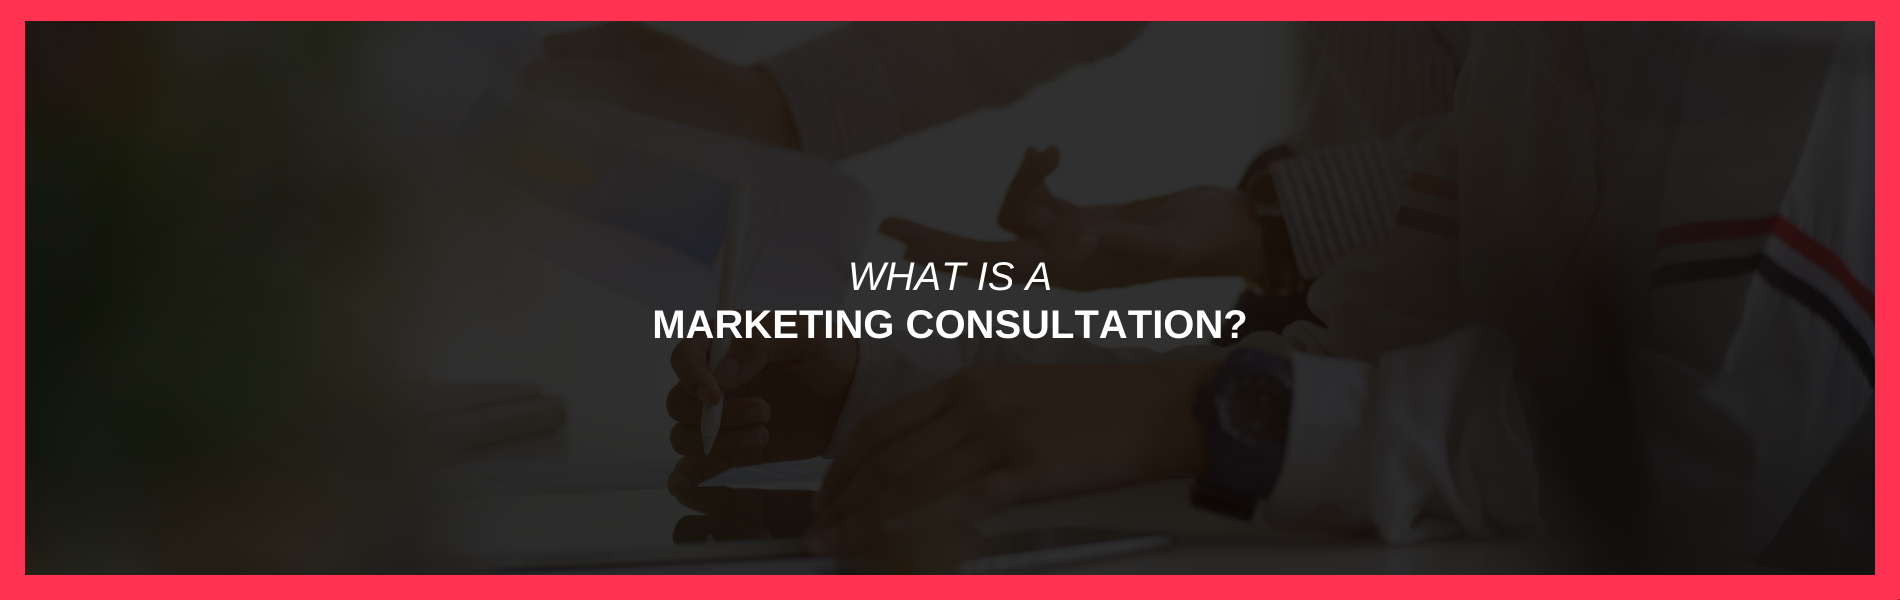 Business people work together to analyze data during a marketing consultation.